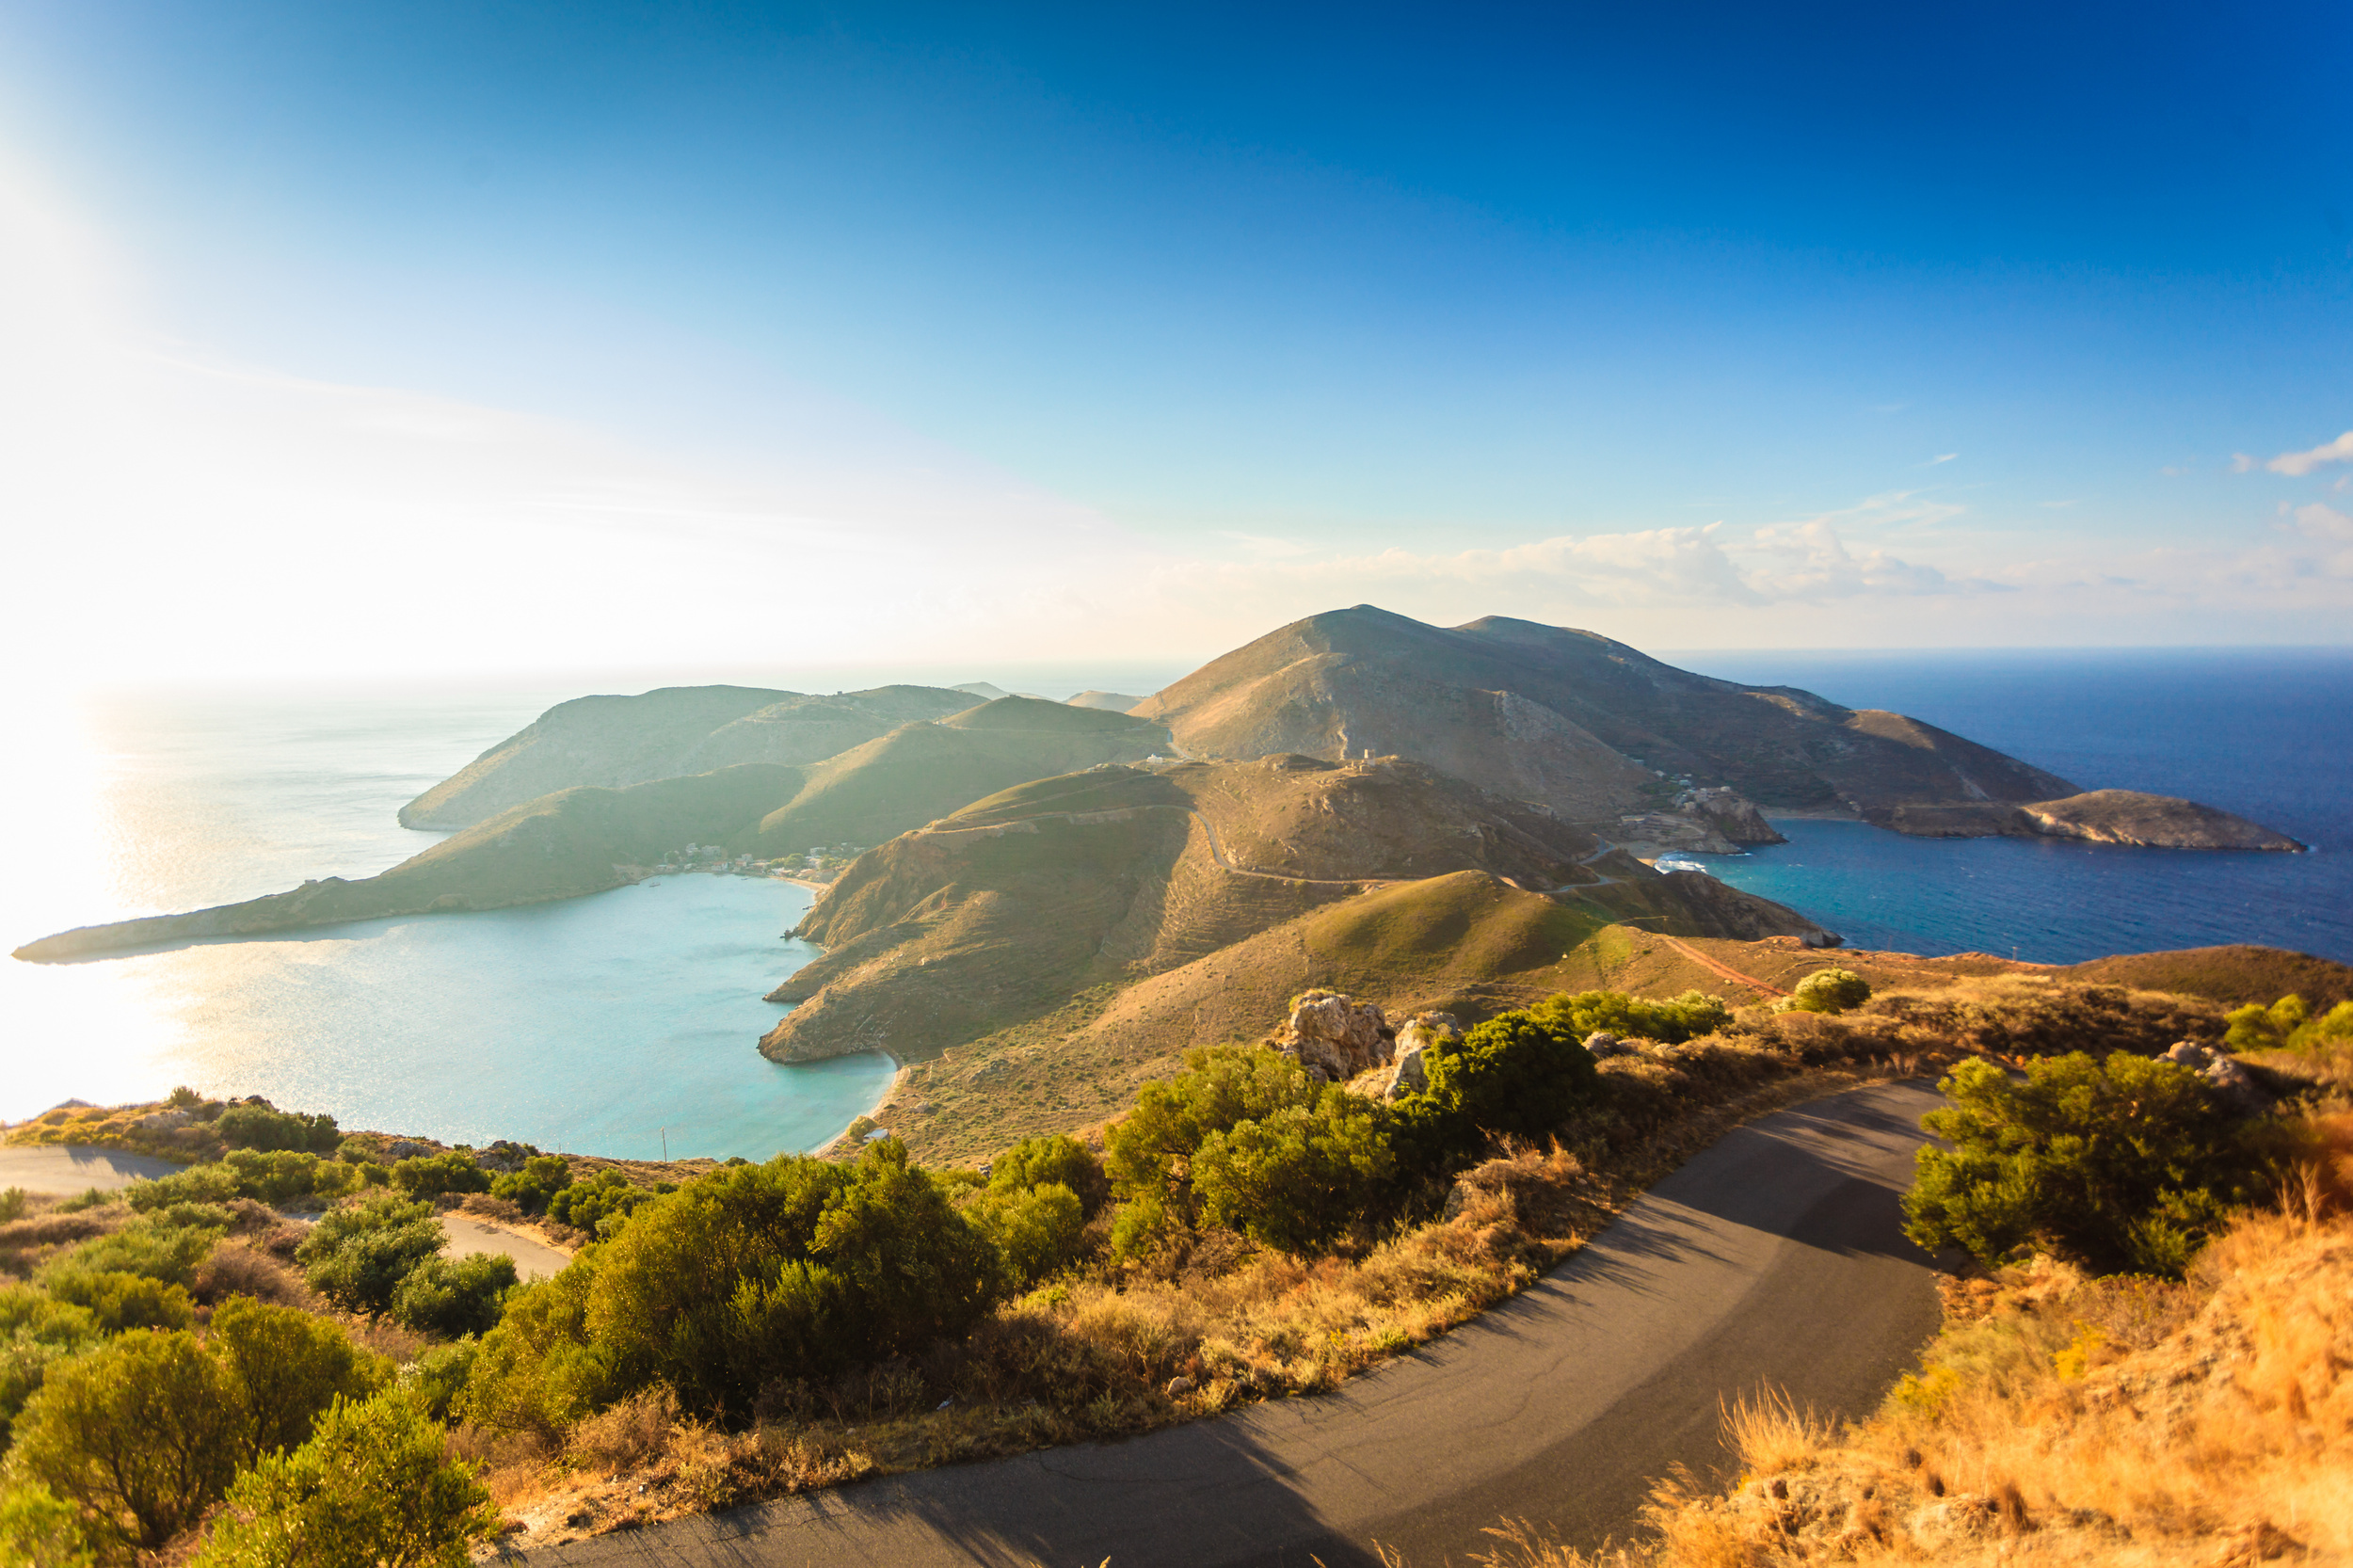 <p>On the southernmost tip of Greece lies the Mani Peninsula, home to undiscovered beaches and mostly empty villages that cling to the cliff sides. Rent a car to follow the meandering roads and enjoy the rugged landscape.</p><p>You may also like: <a href='https://www.yardbarker.com/lifestyle/articles/you_only_need_a_toaster_oven_to_make_these_25_awesome_recipes/s1__23625967'>You only need a toaster oven to make these 25 awesome recipes</a></p>